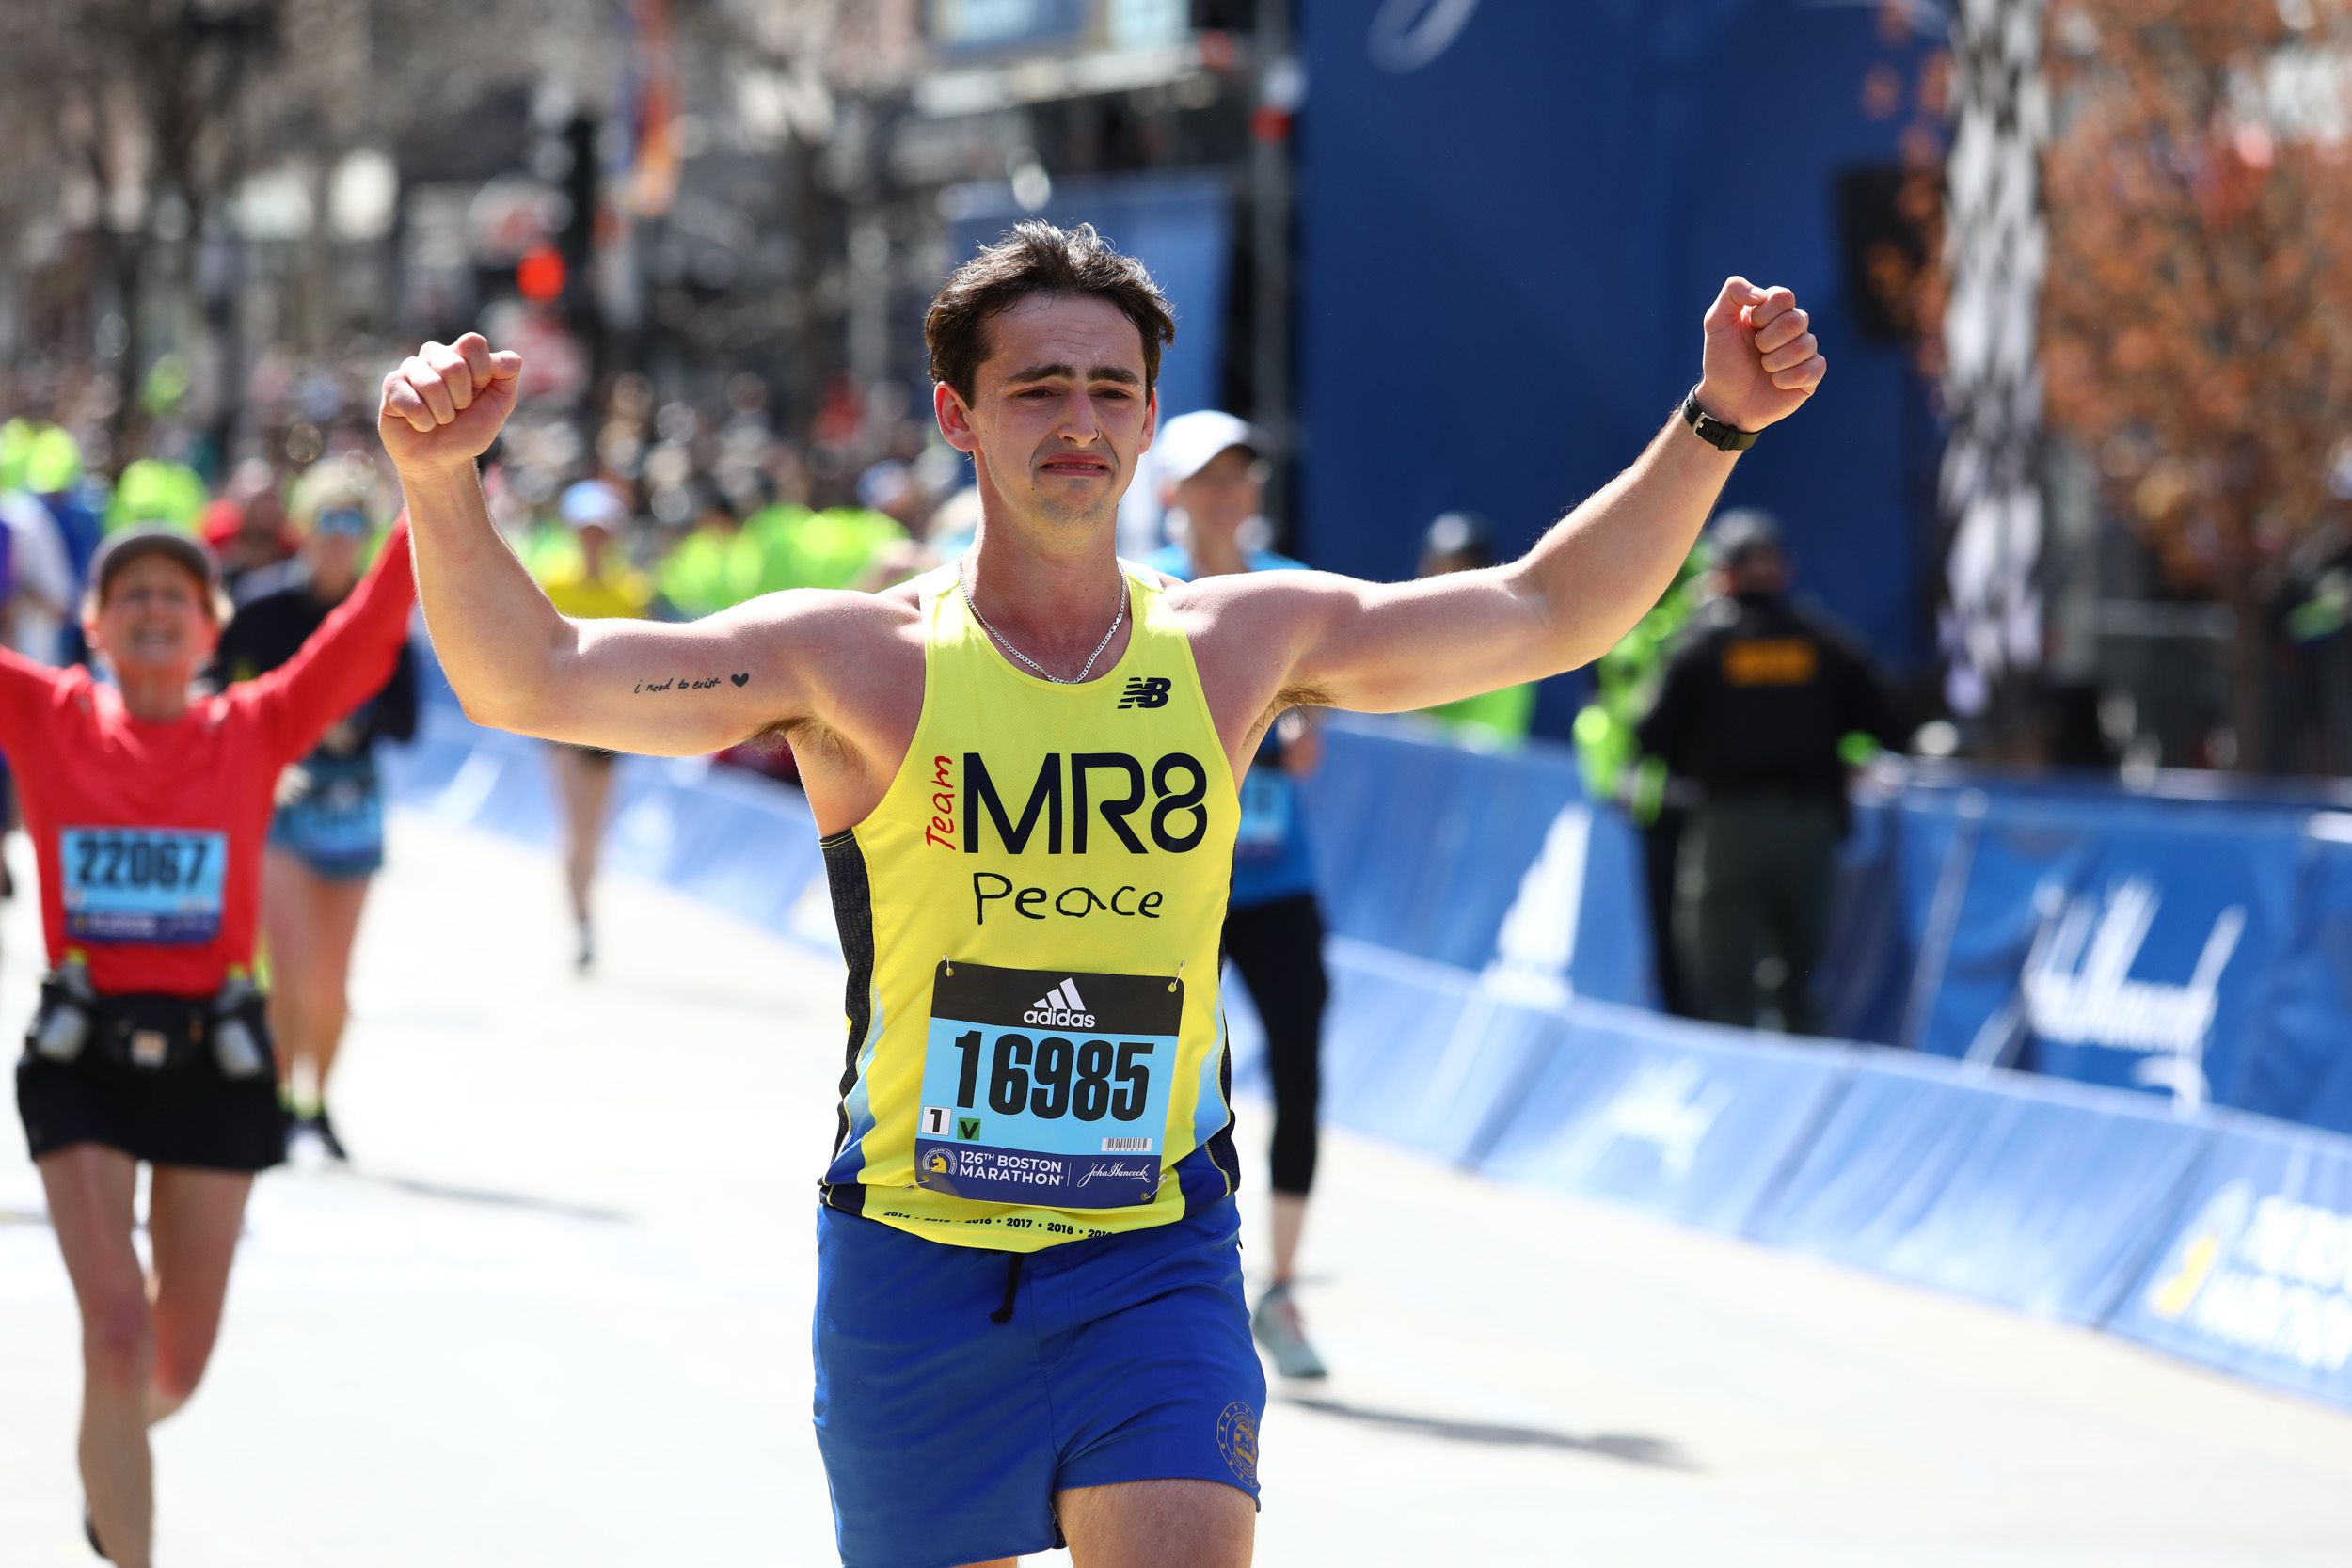 Boston Marathon 2023: These celebrities are running in this year's race